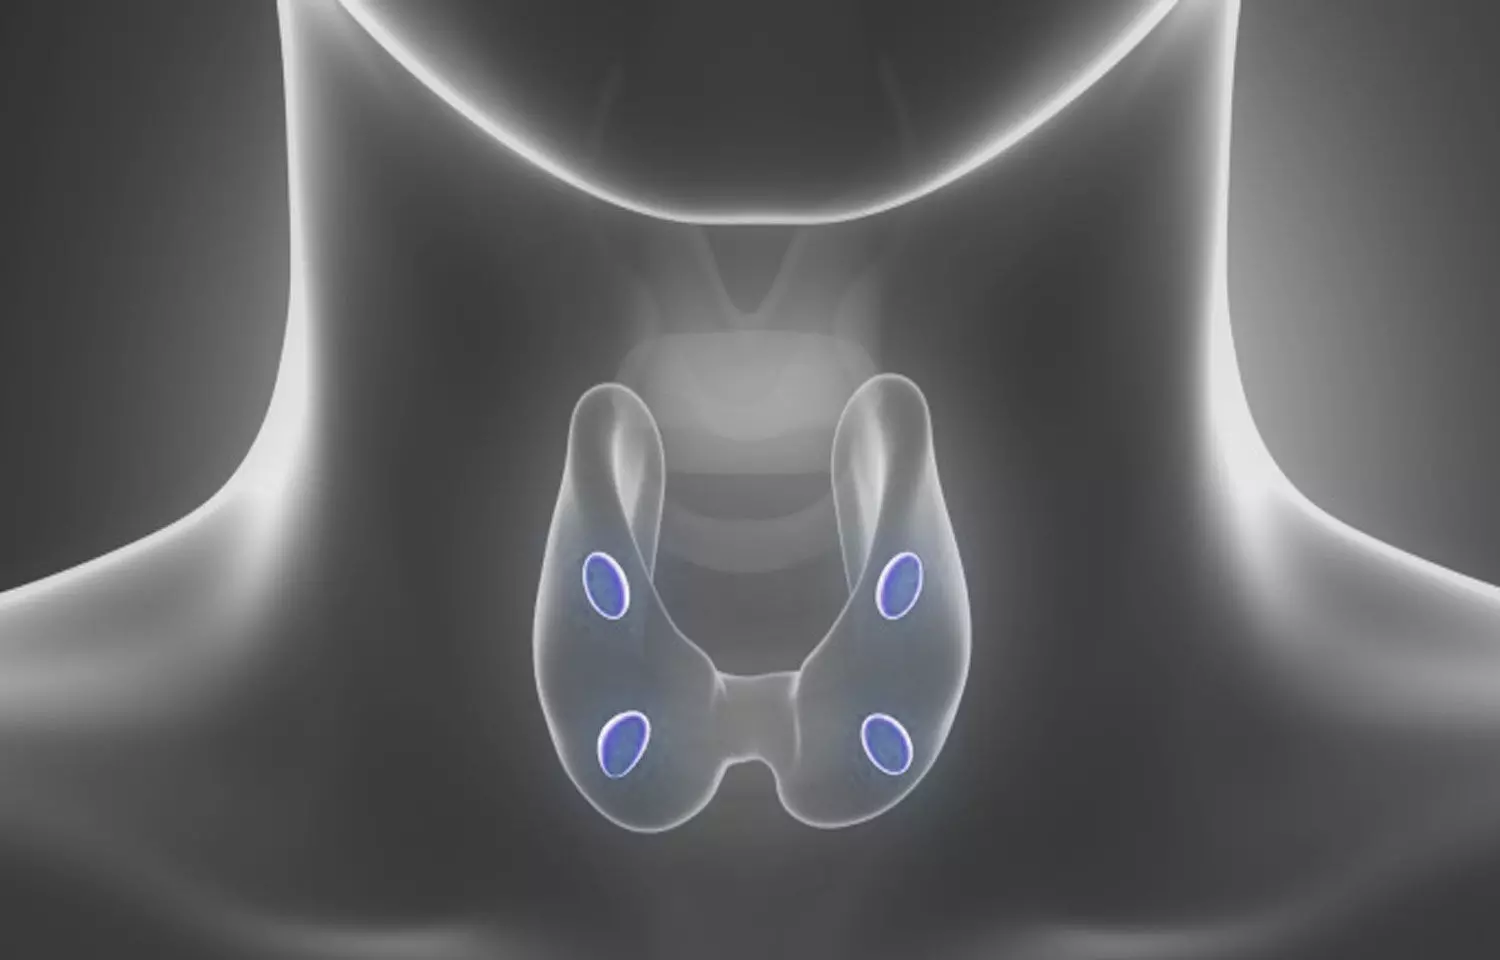 Surgery fails to reduce morbidity or mortality in mild hyperparathyroidism